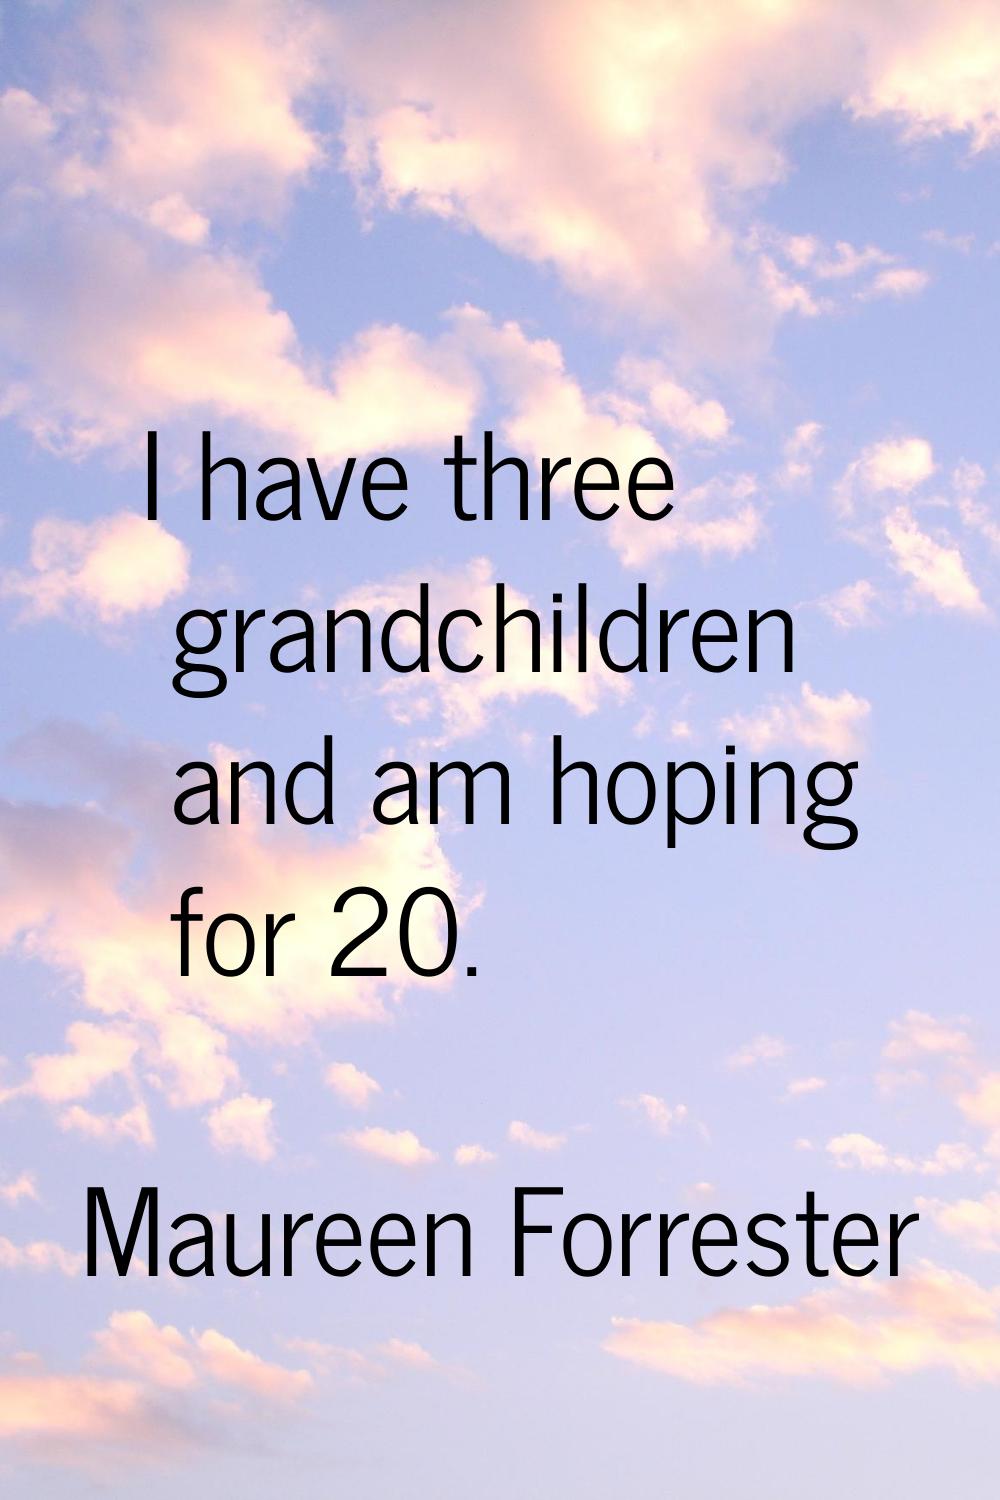 I have three grandchildren and am hoping for 20.